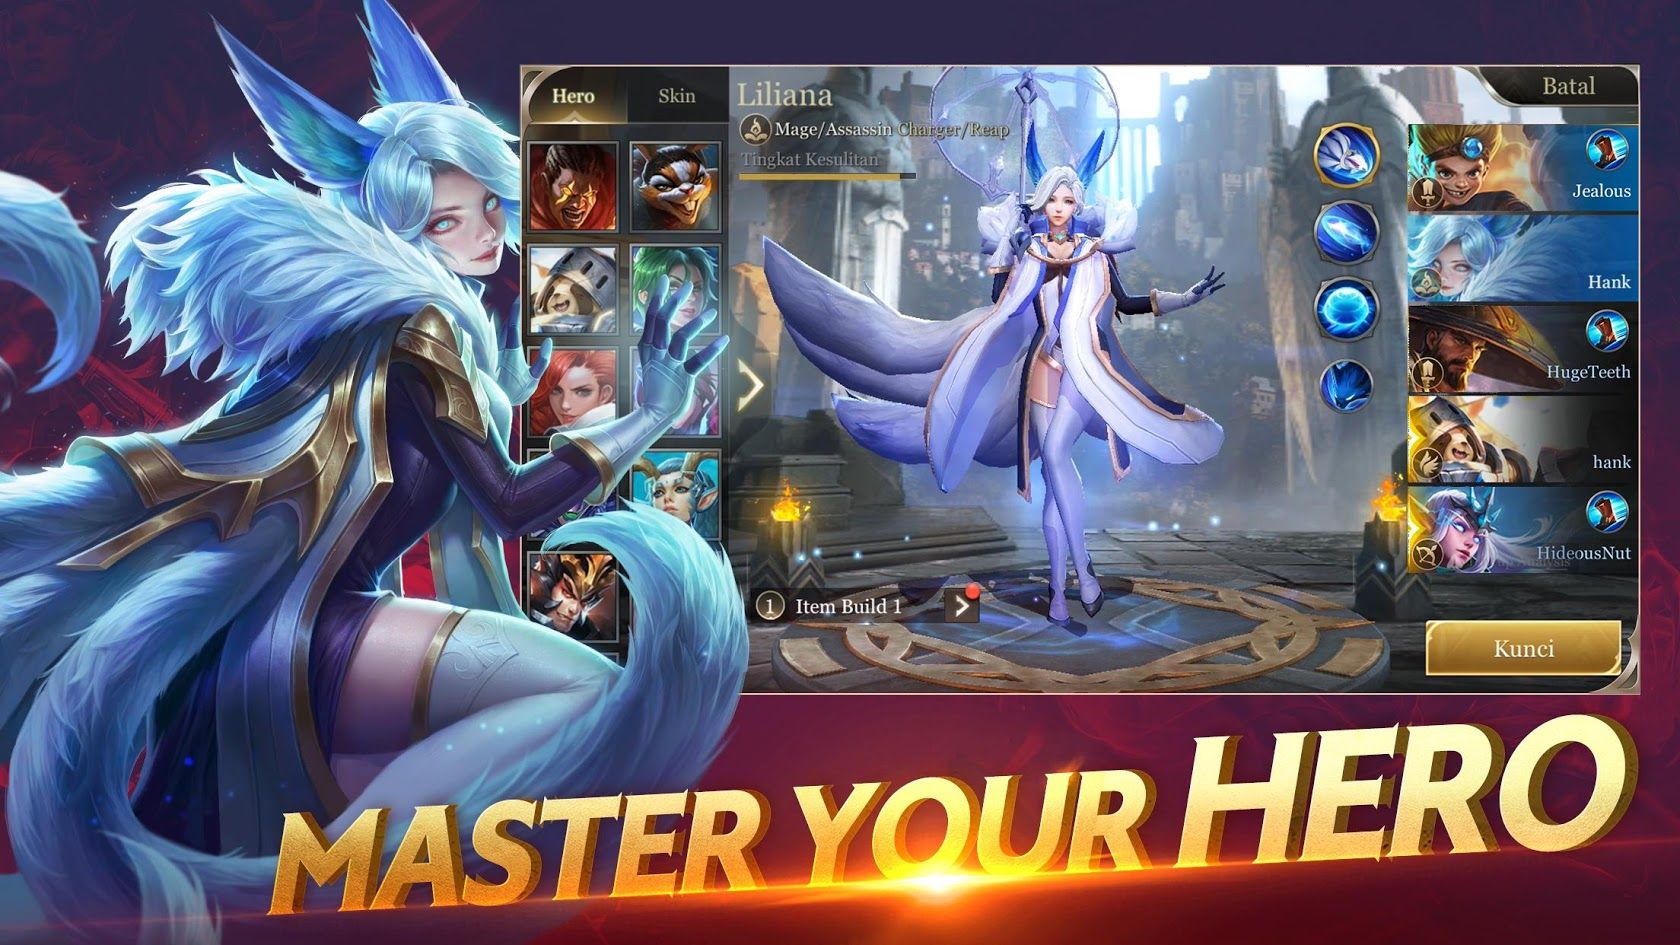 Arena of Valor for Android - APK Download